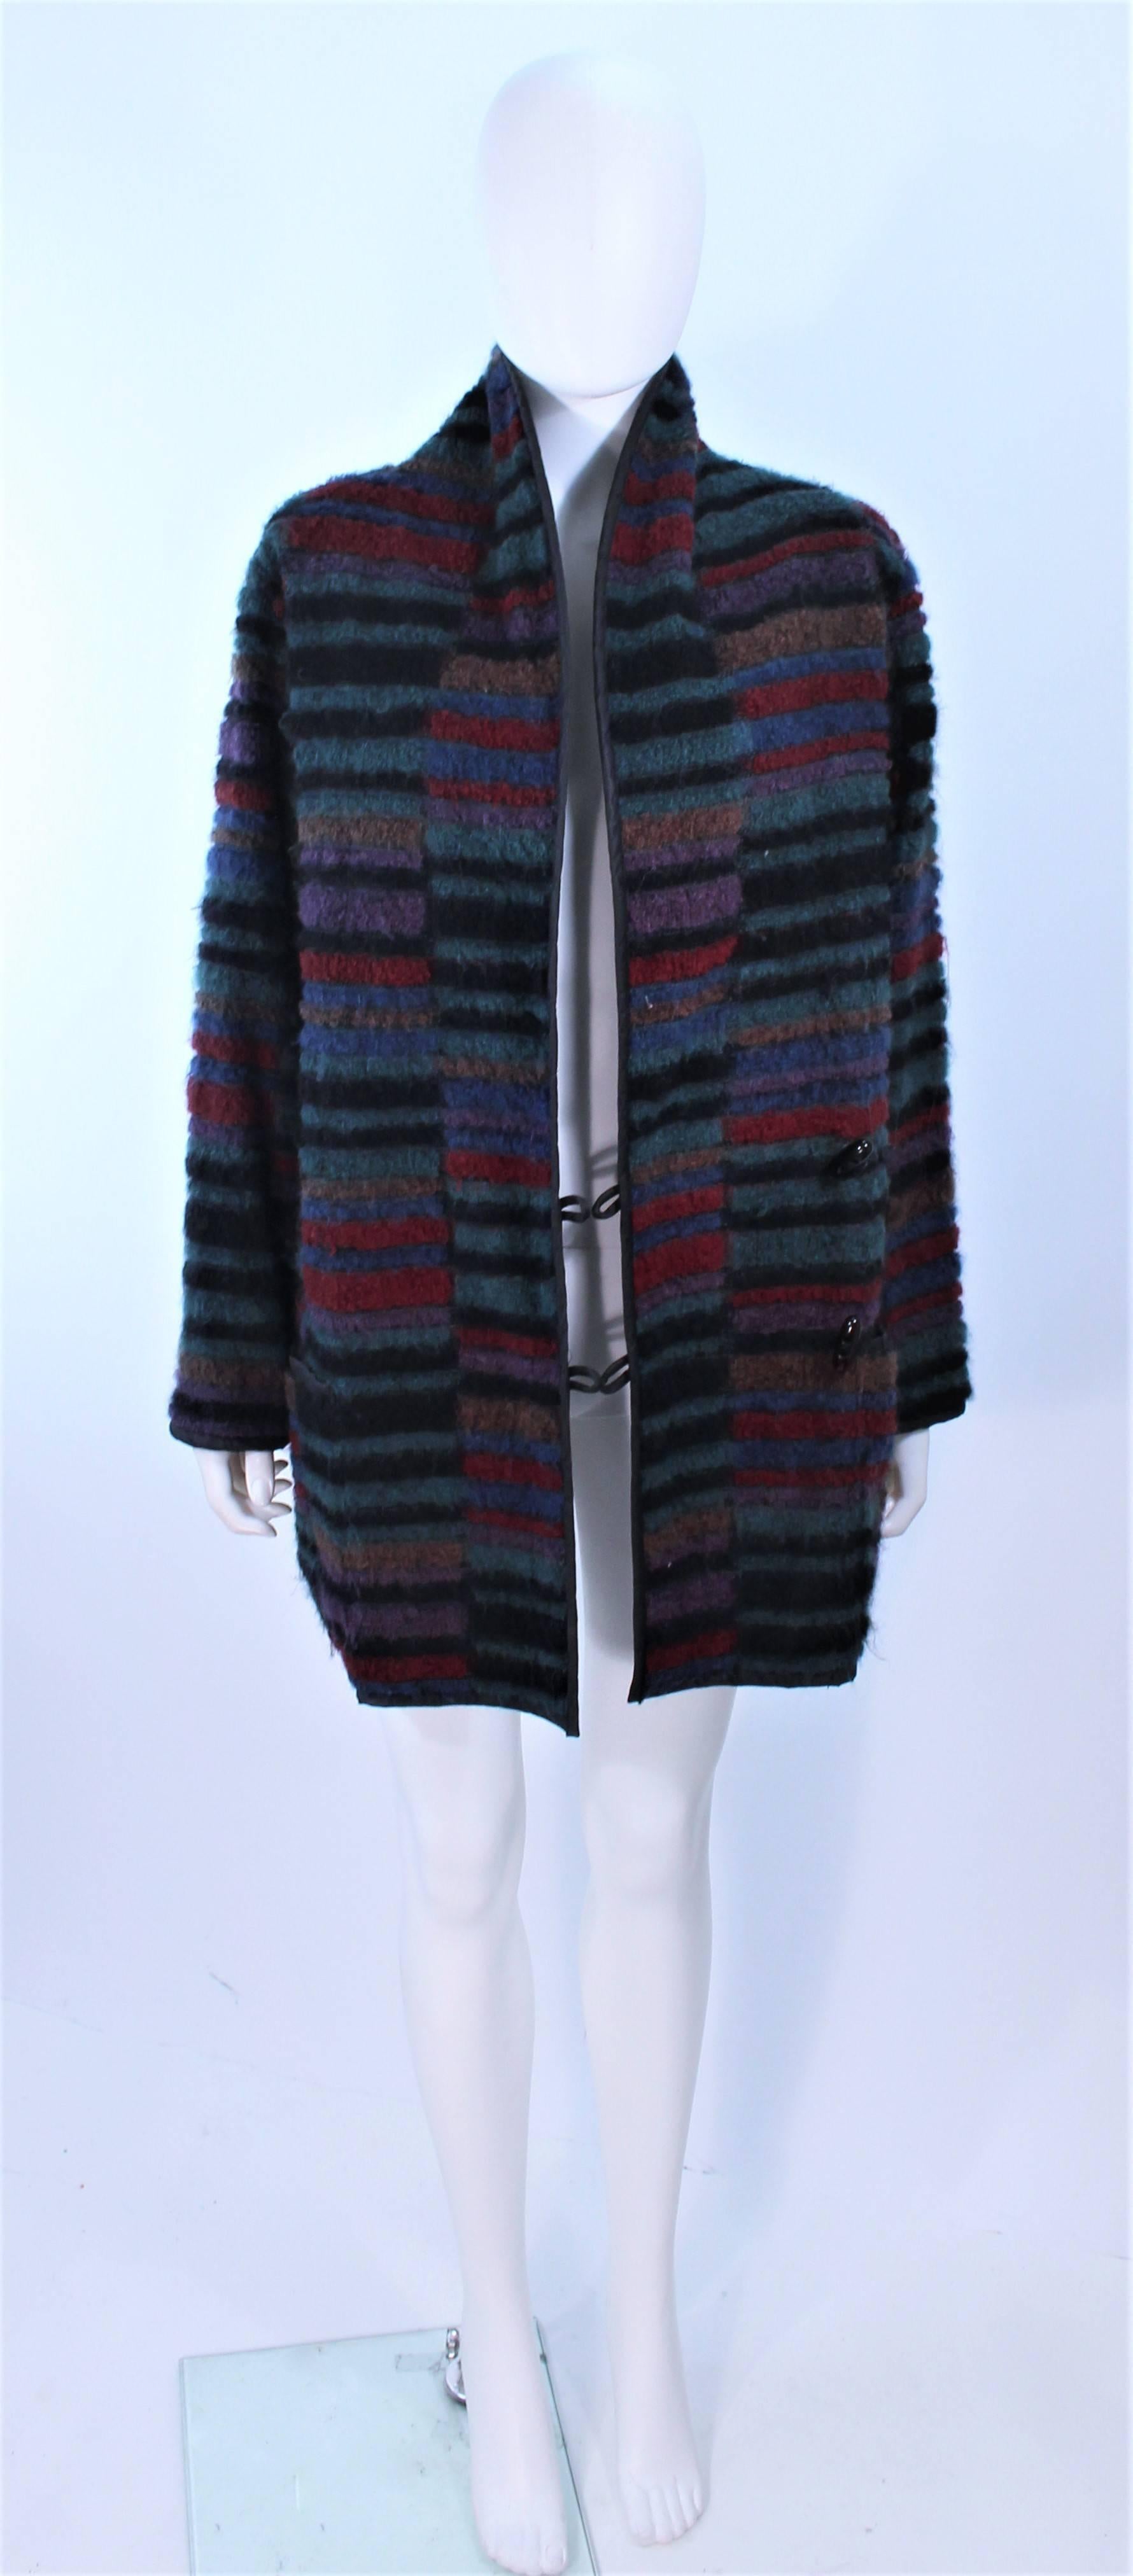 This Missoni design is composed of a multi-color knit and a reversible black quilted interior. Features a double breasted style with toggle button closures and pockets. In excellent vintage condition.

**Please cross-reference measurements for